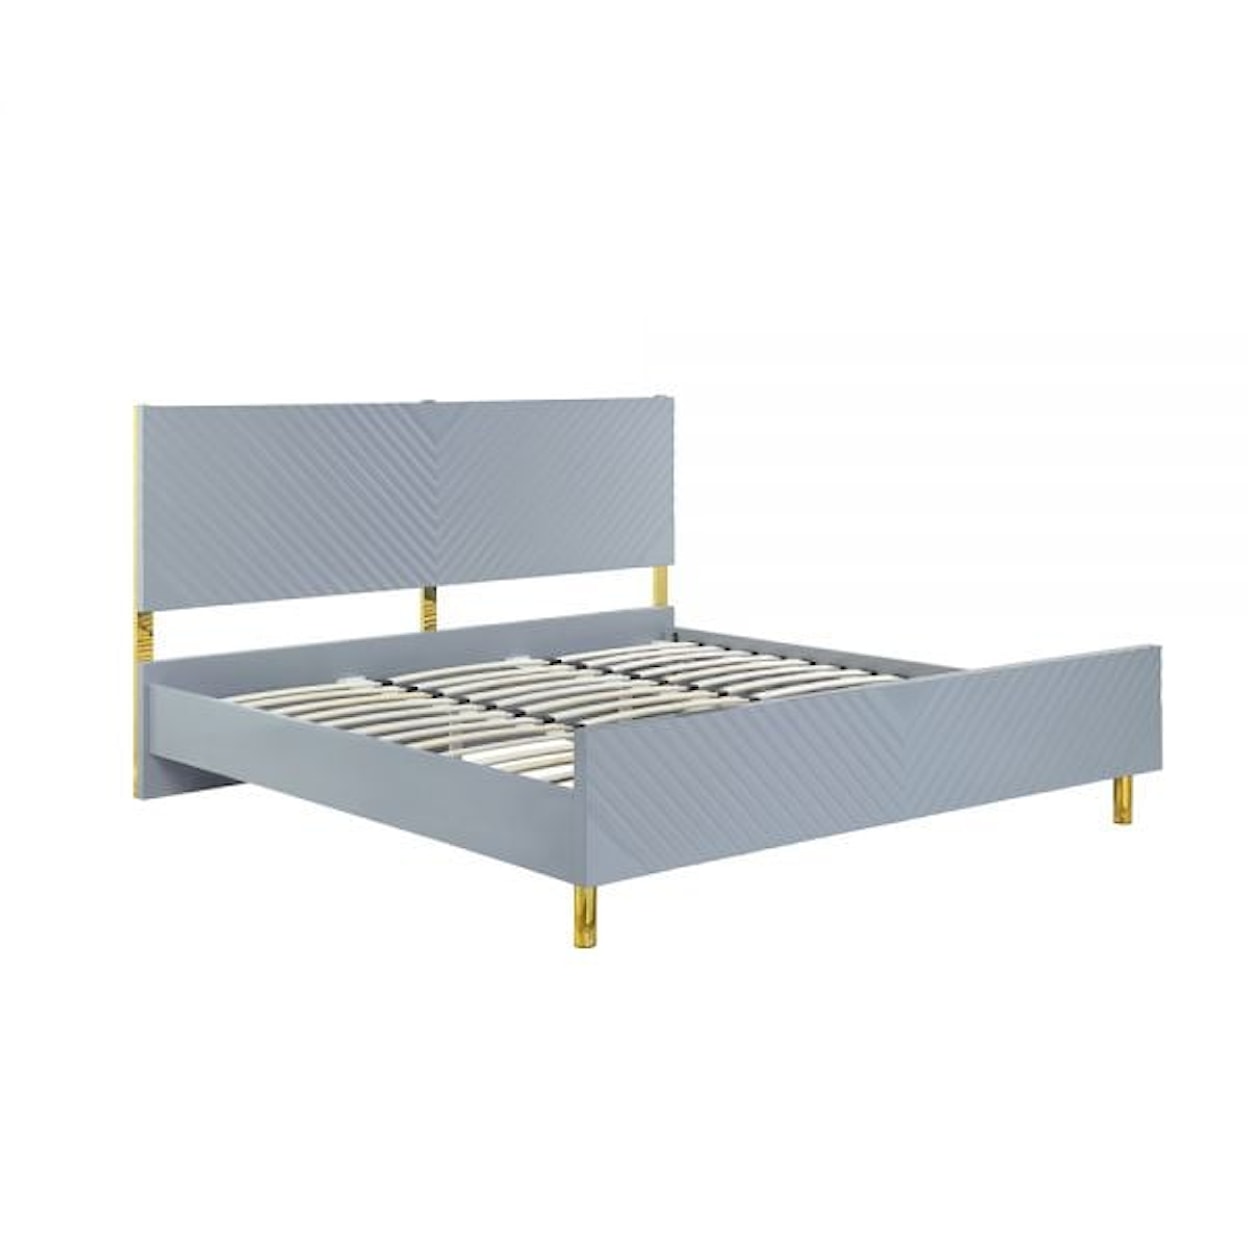 Acme Furniture Gaines California King Bed